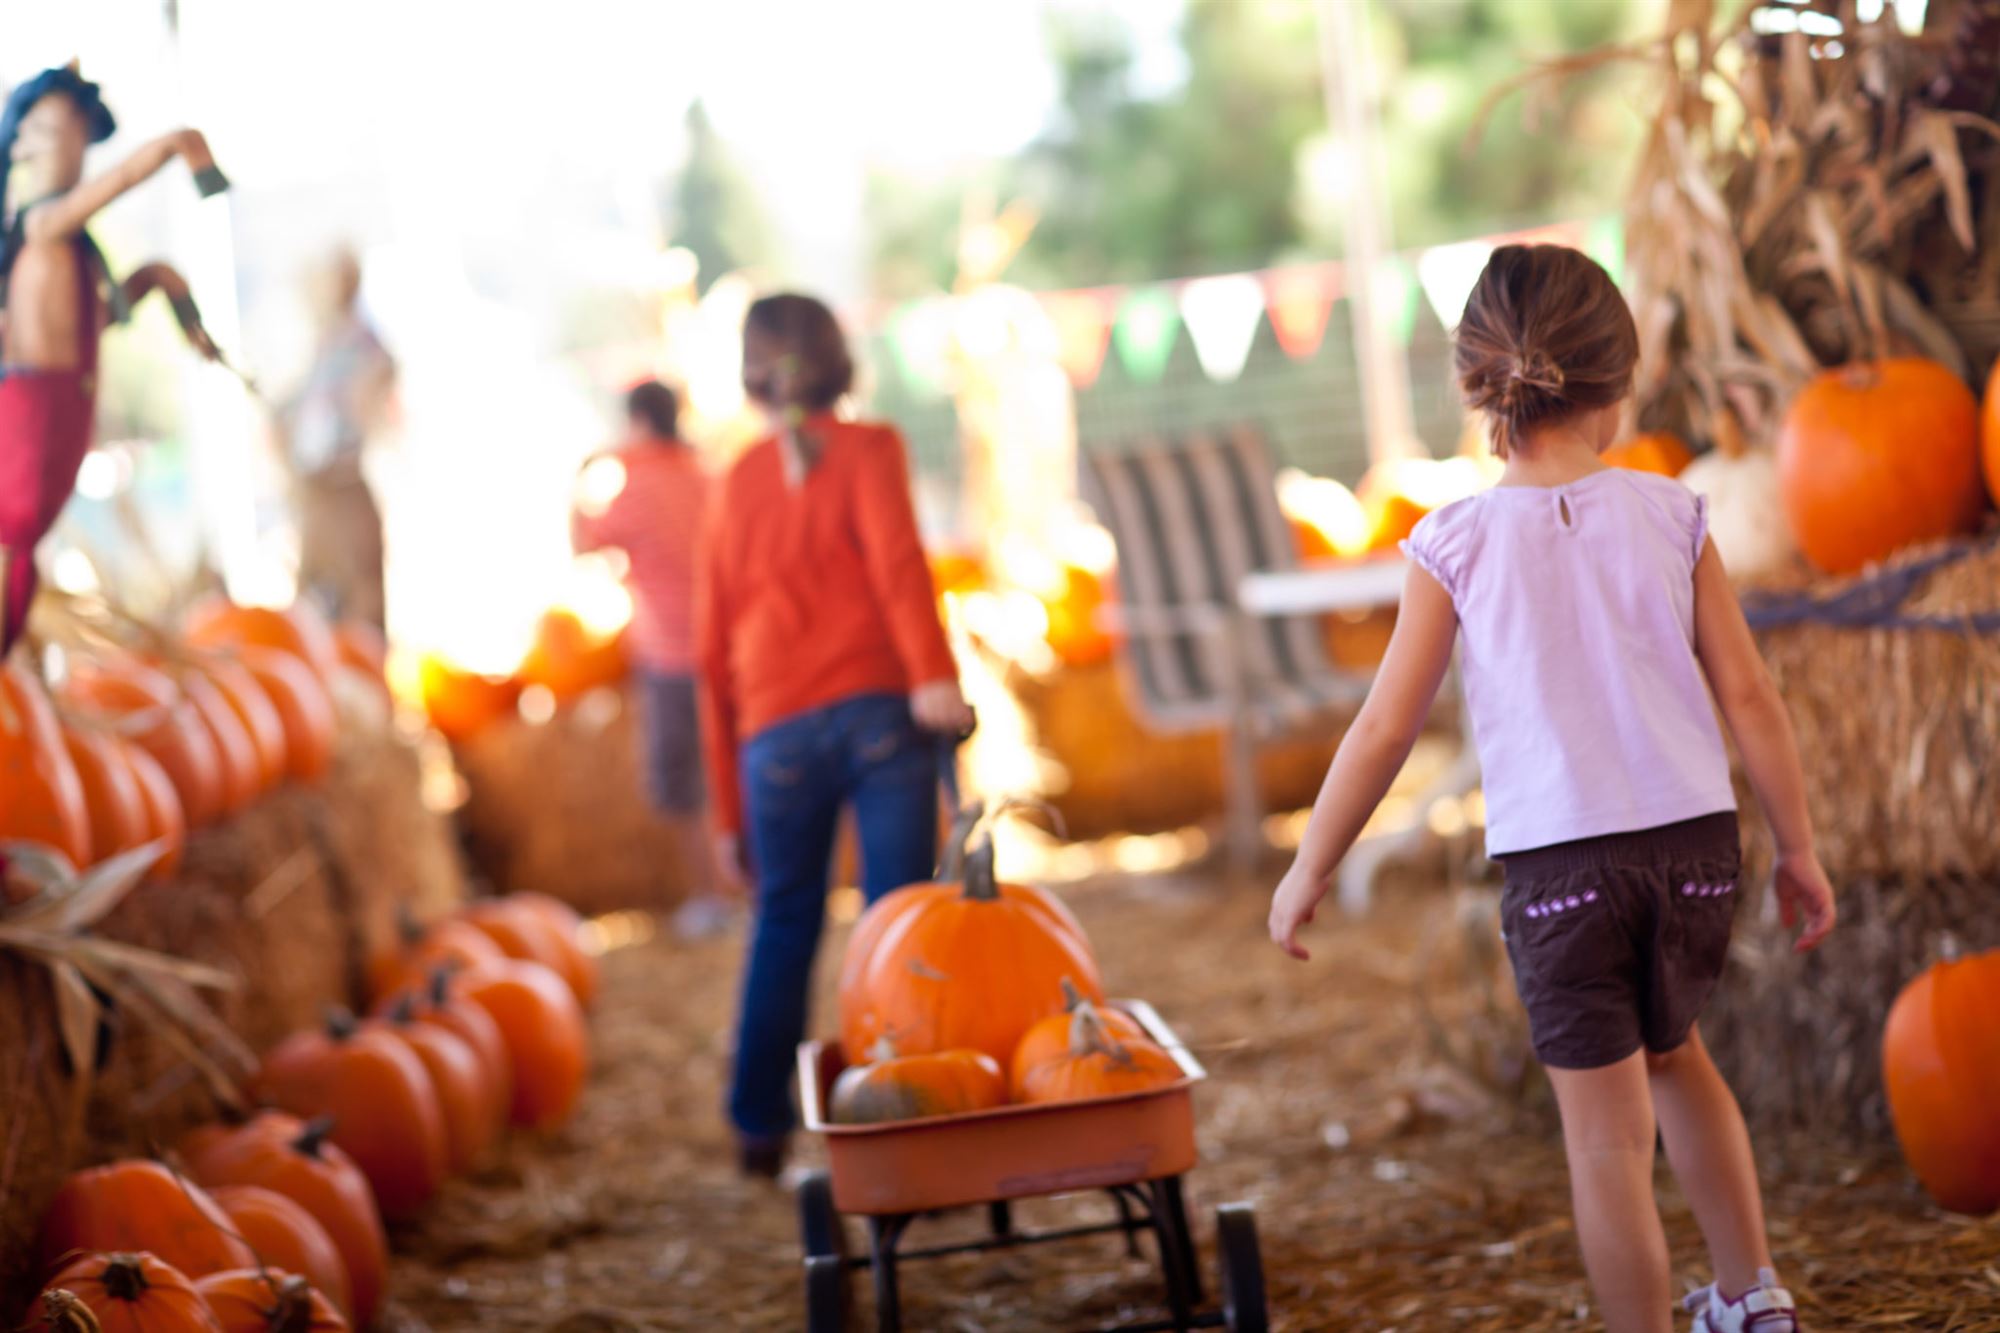 The Best Pumpkin Picking Patches And Farms In NJ